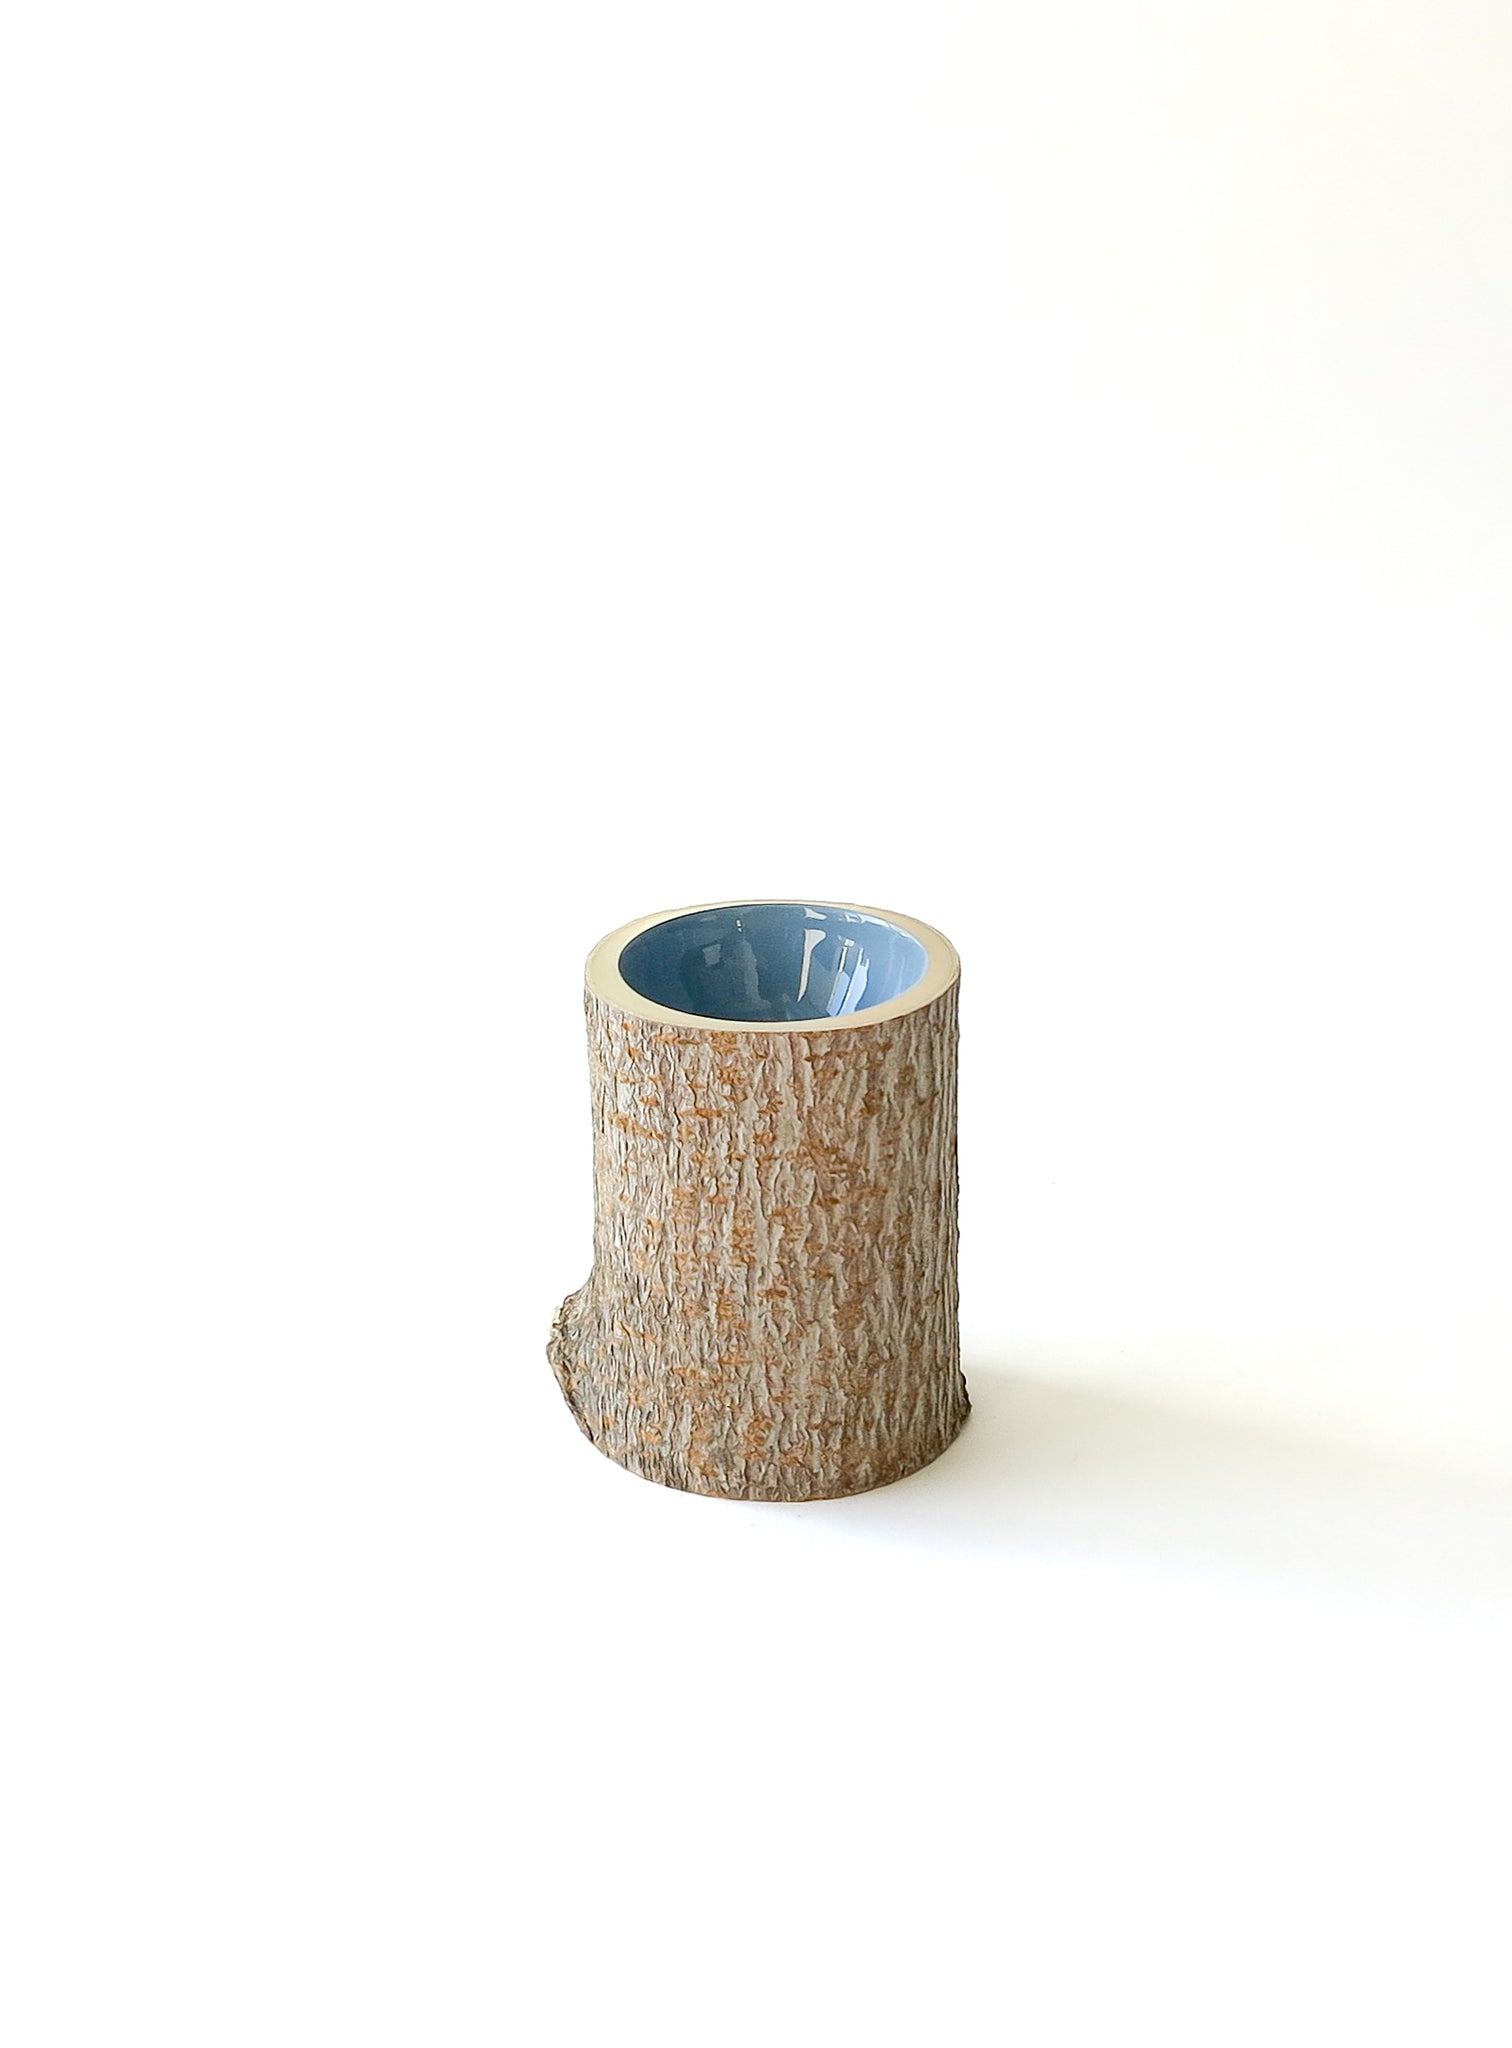 Size 2 Log Bowl - extra small wooden bowl with rough bark, glossy interior is a dusty denim blue colour.